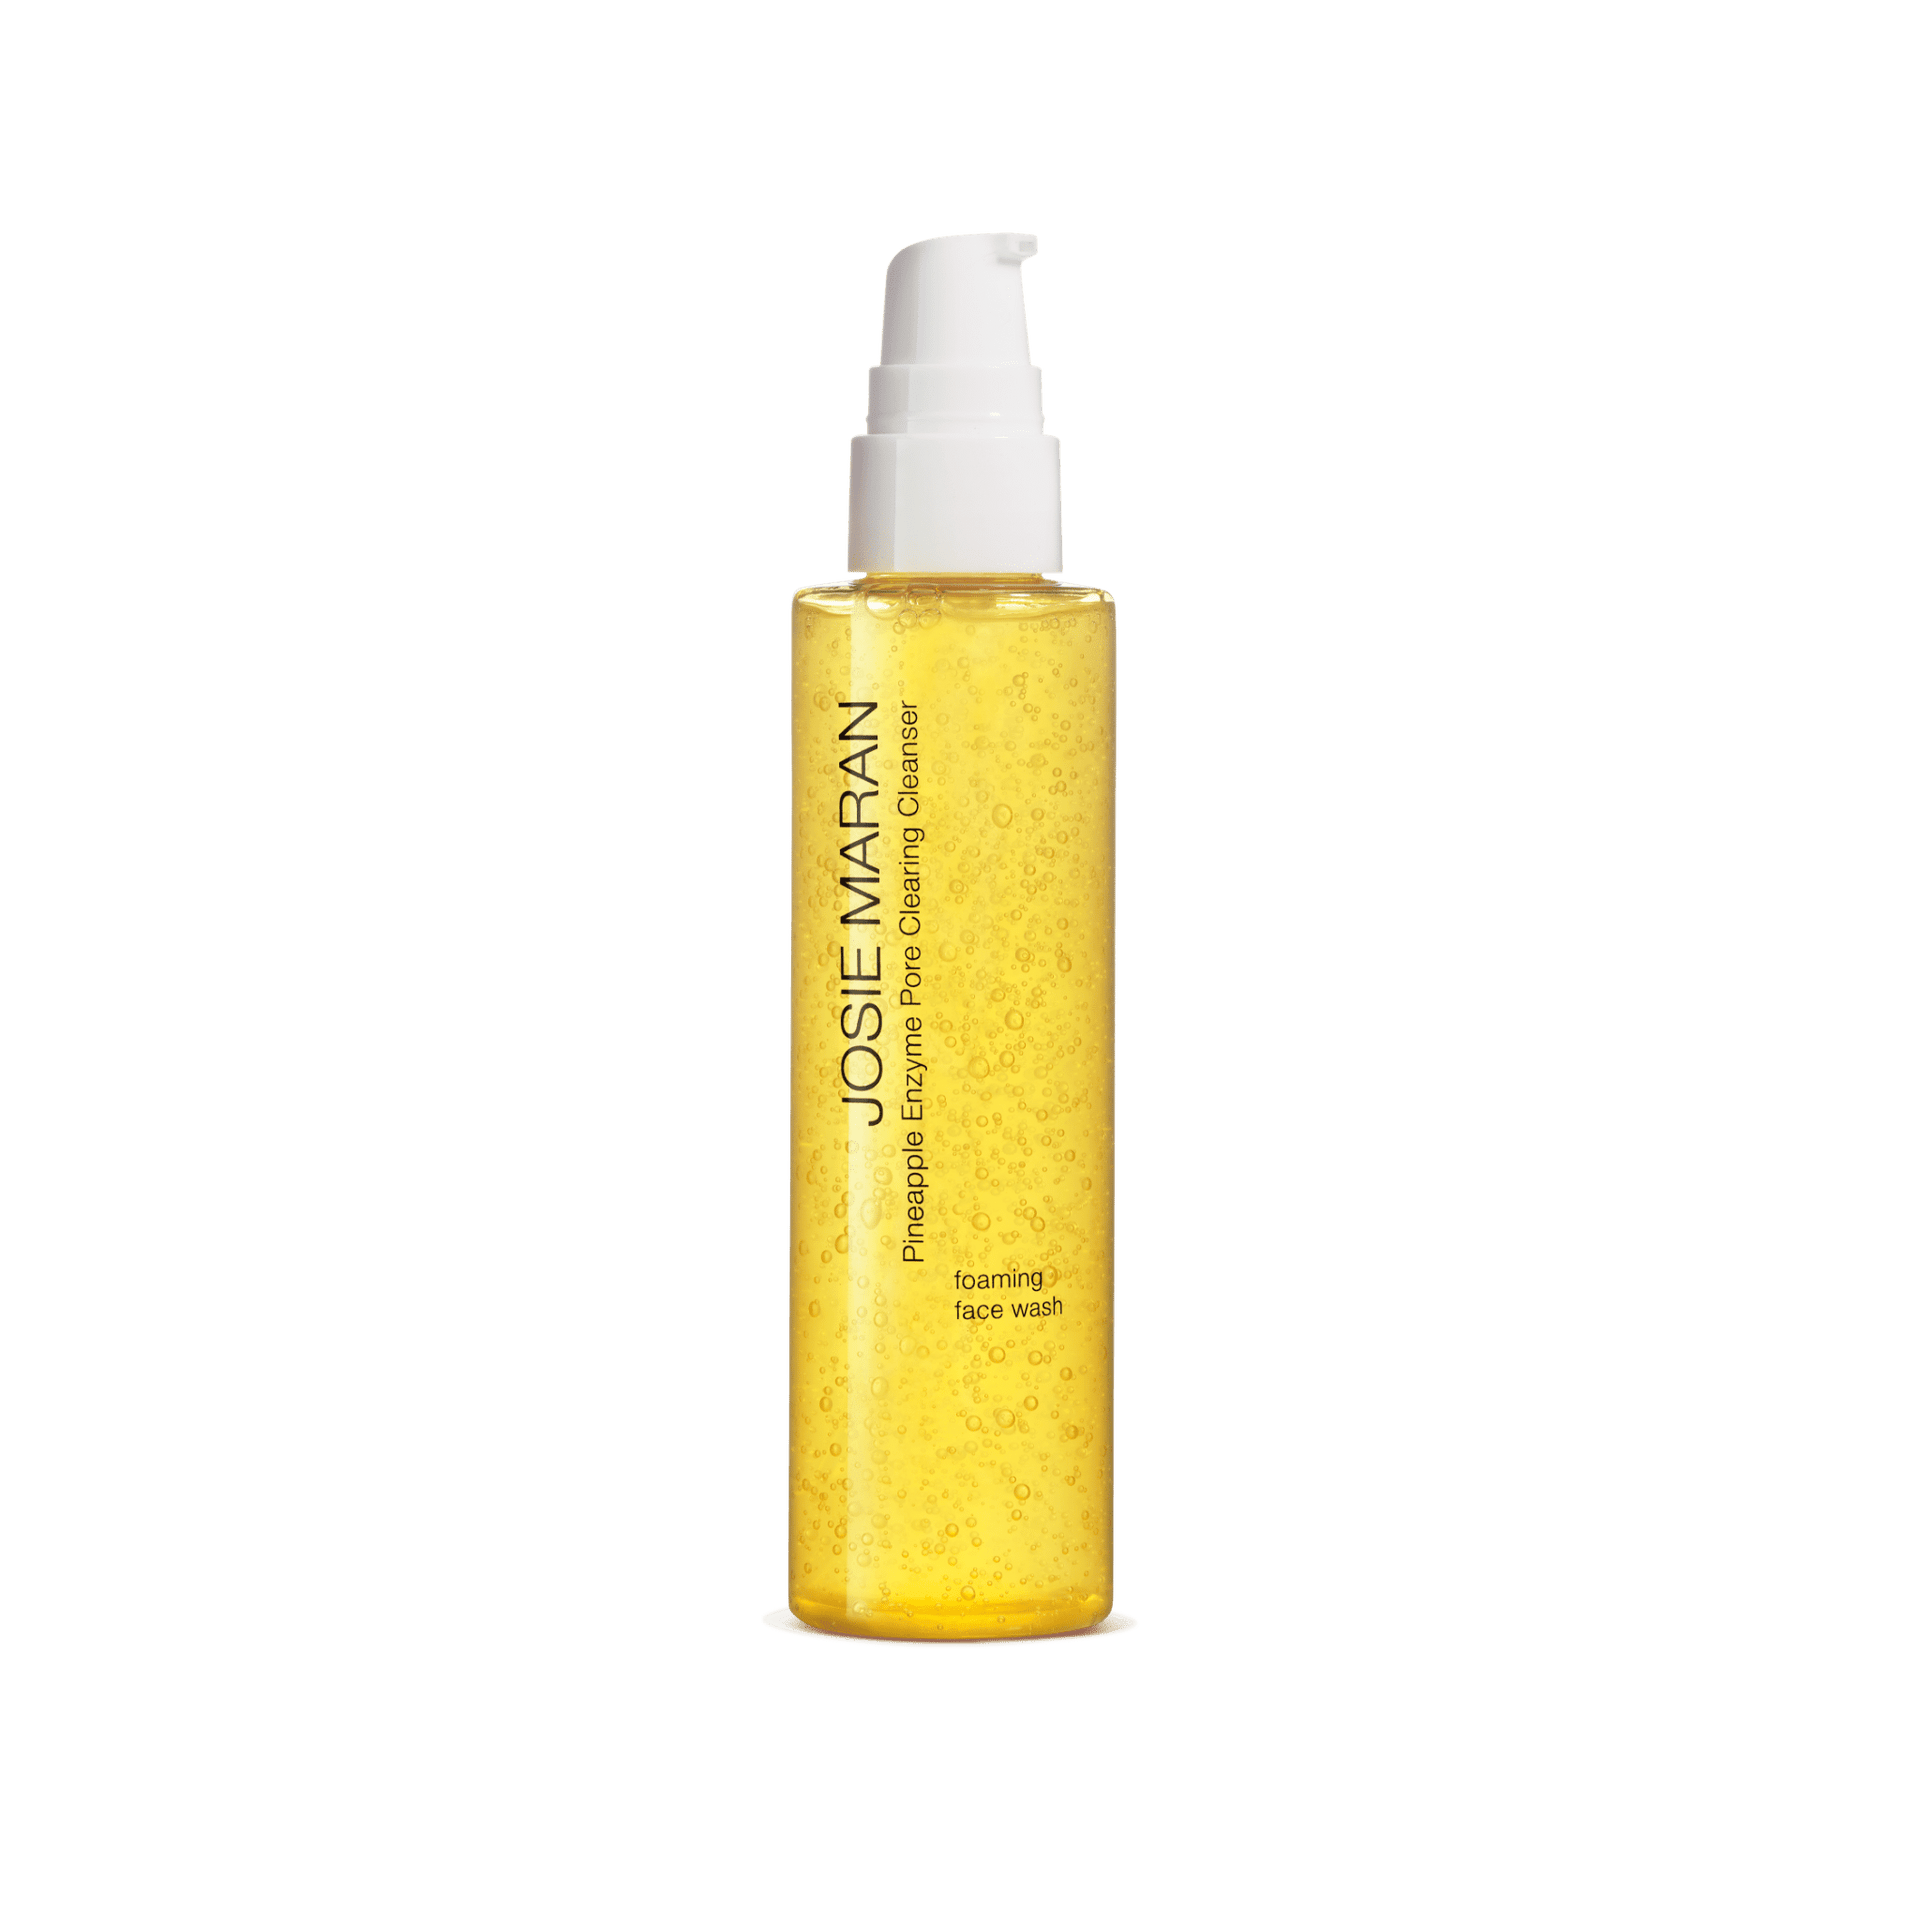 Pineapple Enzyme Pore Clearing Cleanser